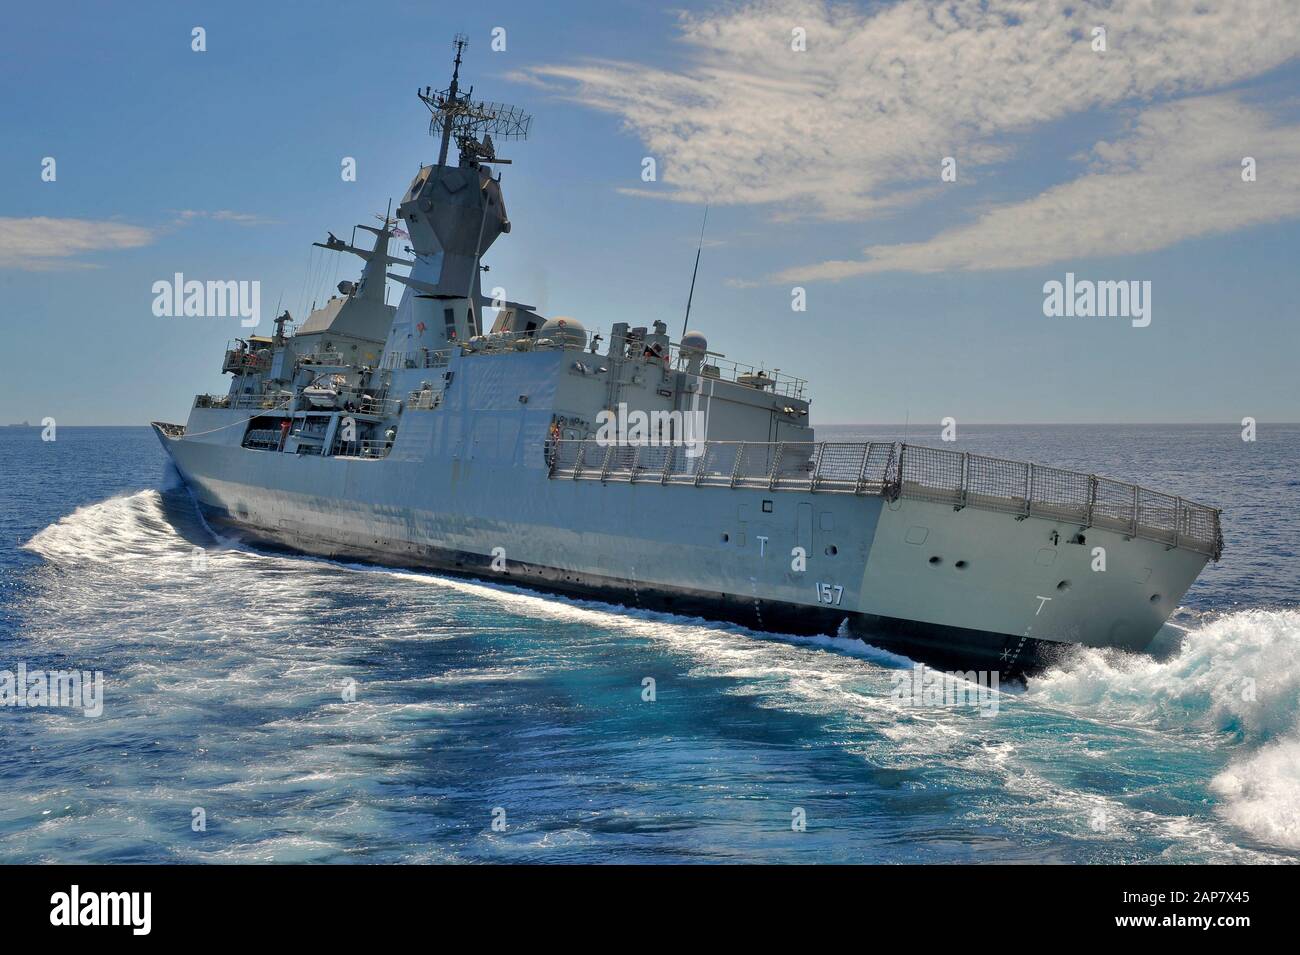 A rear view of an Australian Navy frigate HMAS Perth, turning at speed.. Stock Photo